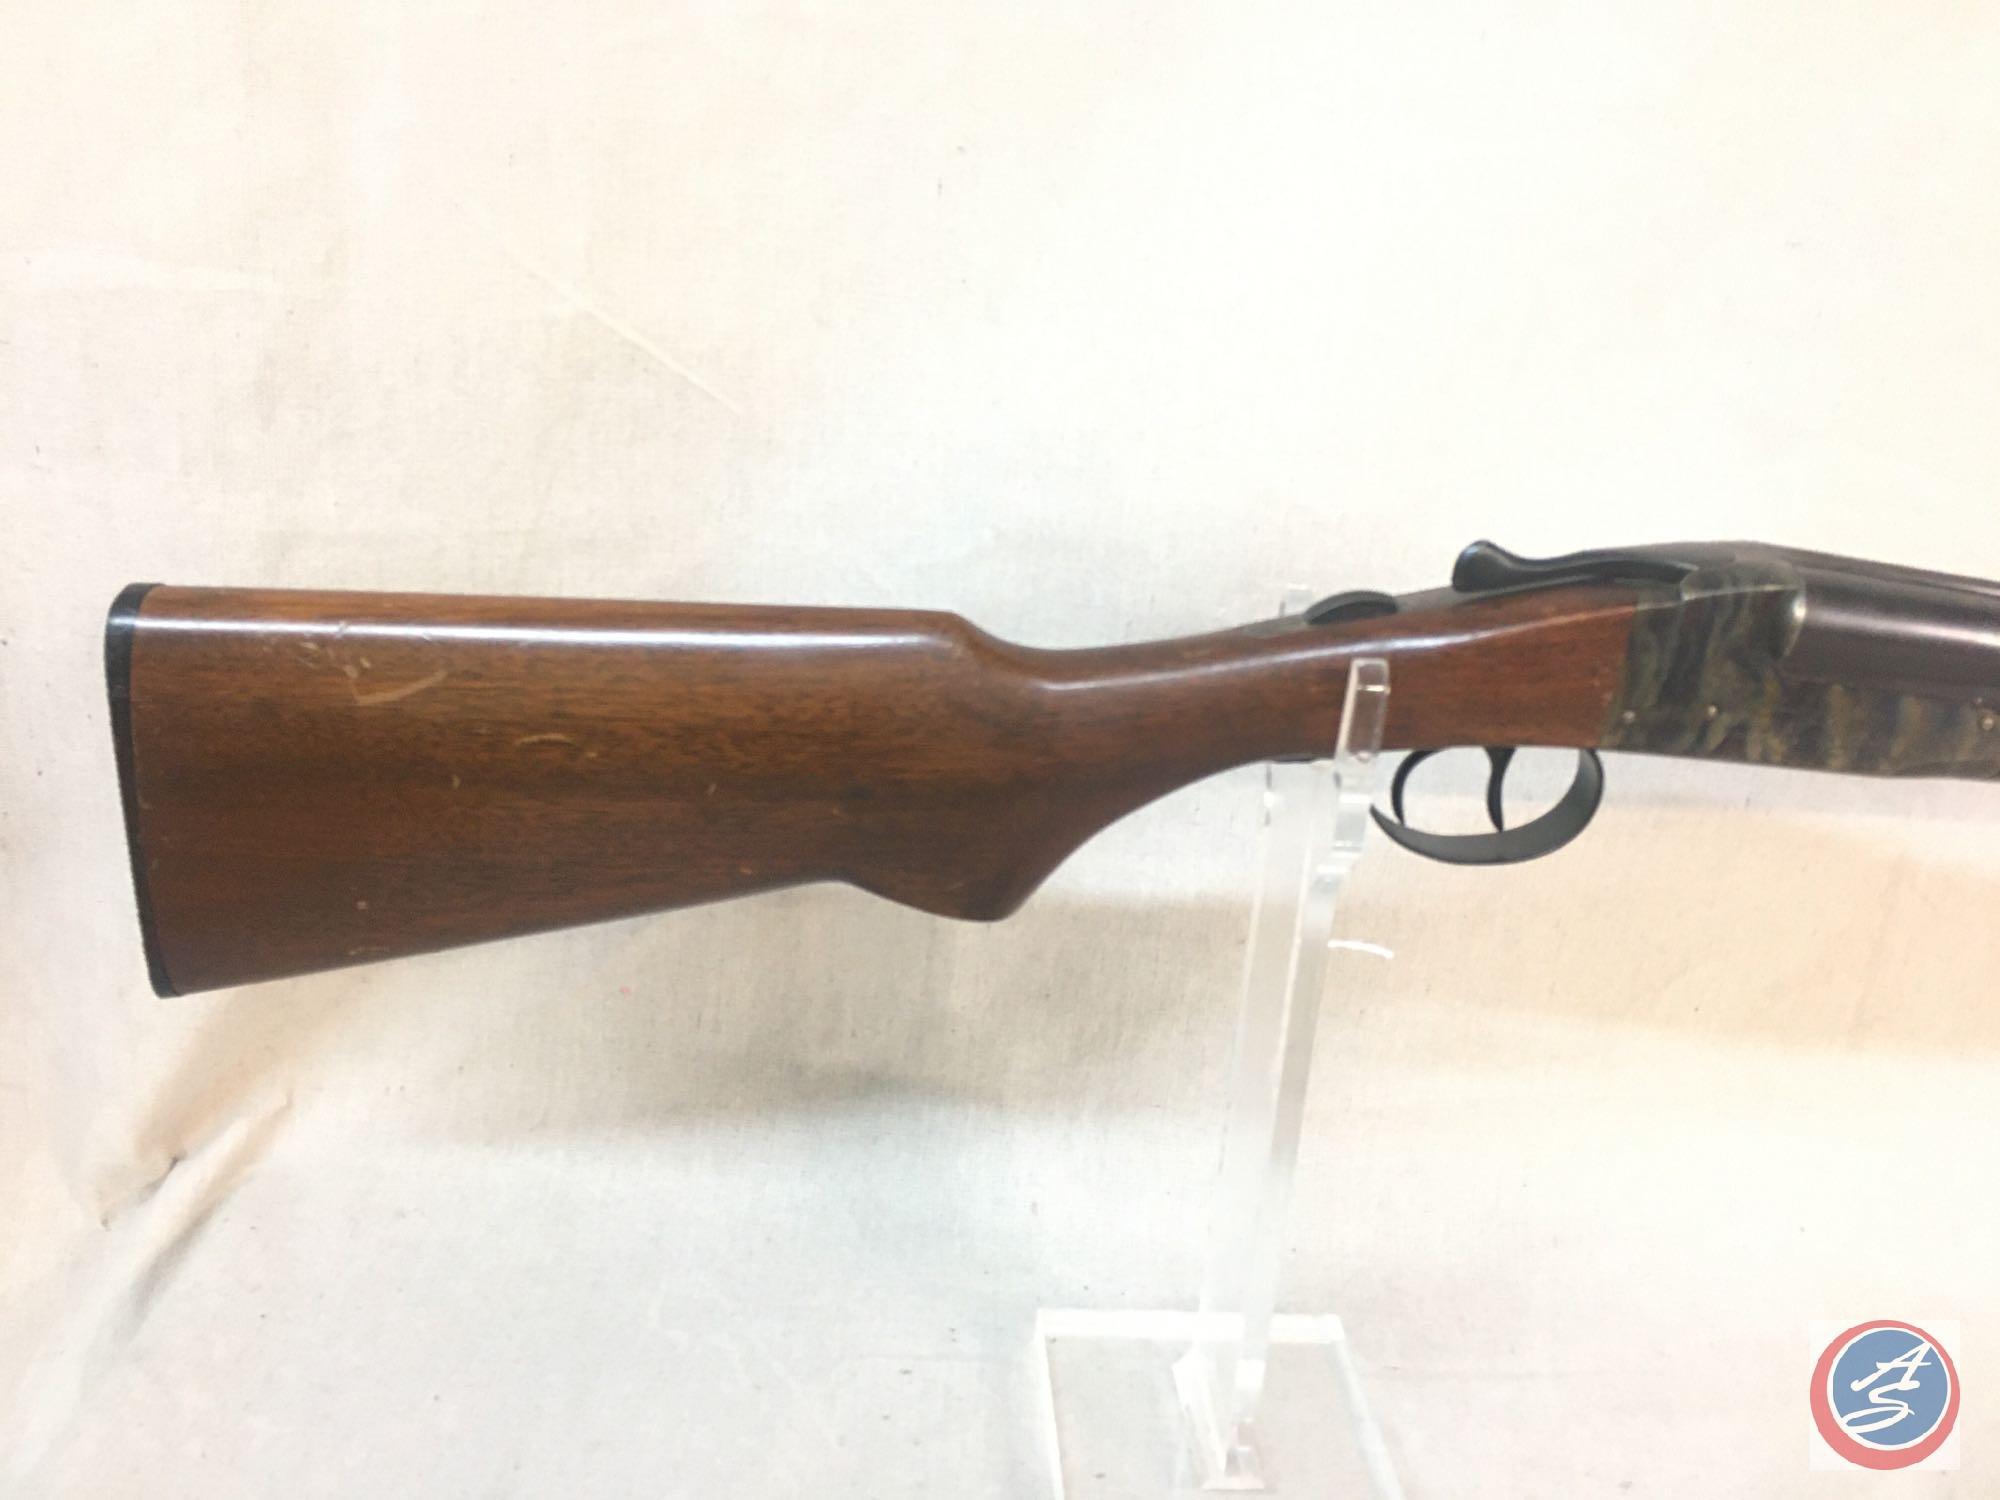 Western Arms, Model:...LLH, 410 Double Barrel,...Shotgun, side by side (made in Ithaca NY) Ser#:3760